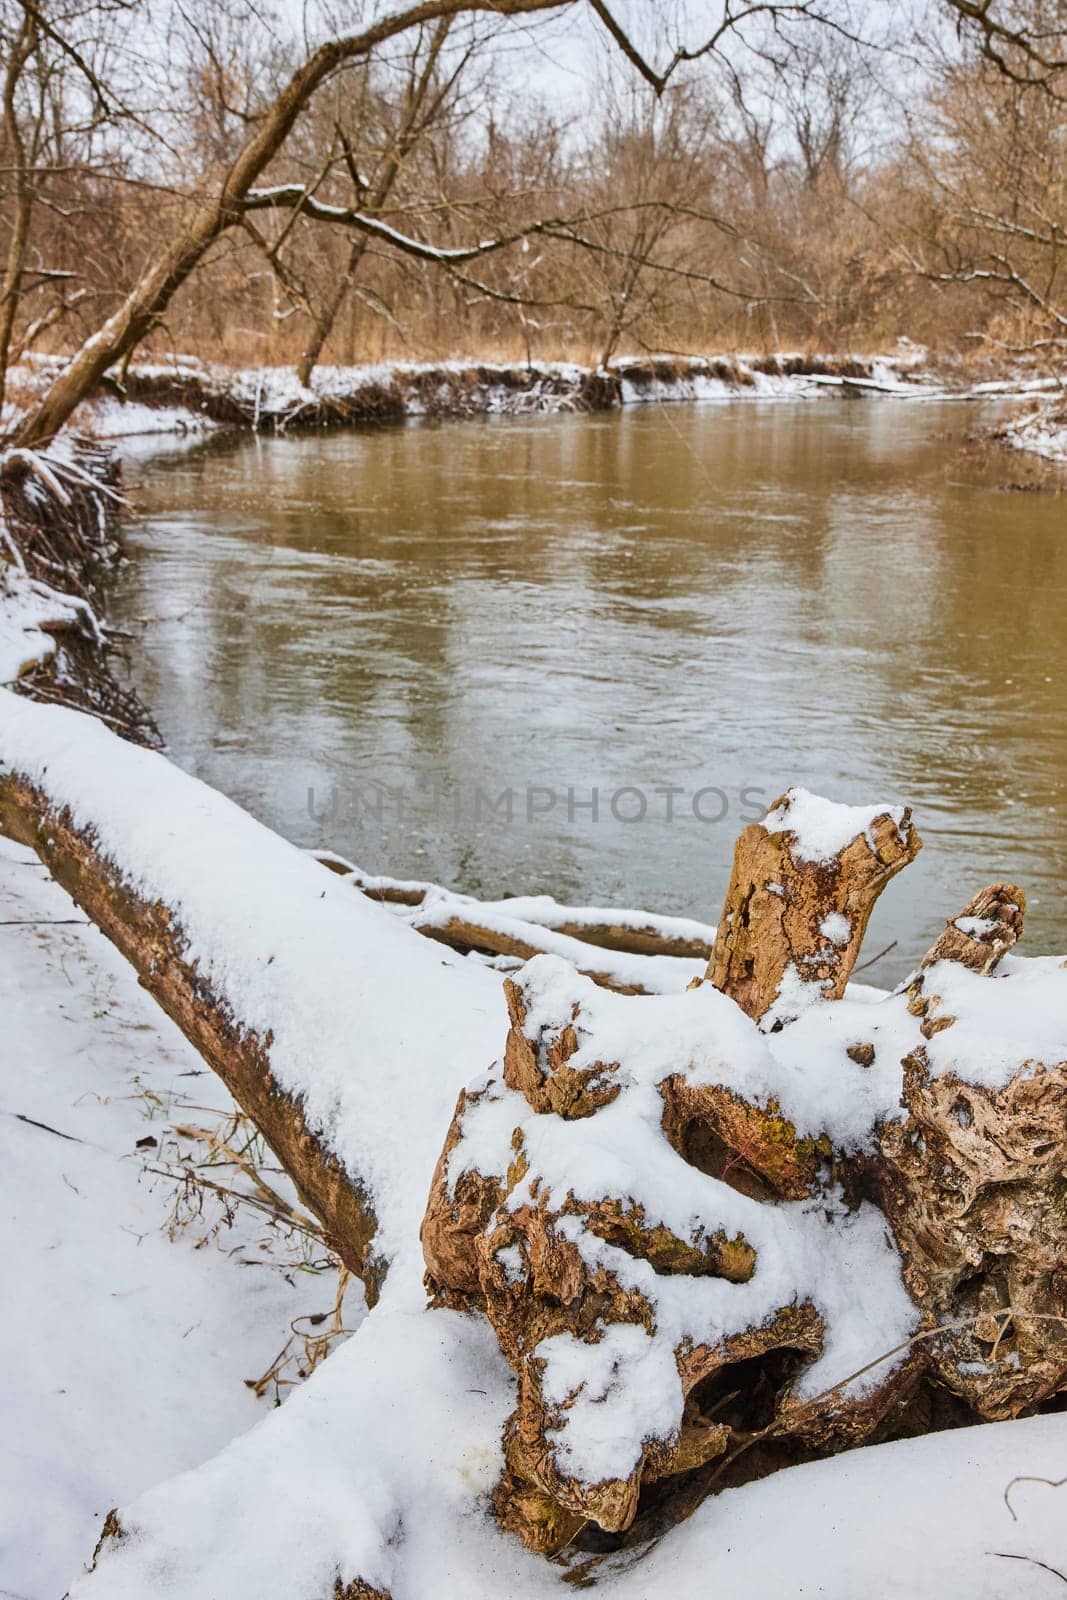 Winter's Tranquility at Cooks Landing County Park, Indiana - Snow-Coated Wilderness with a Serene River View